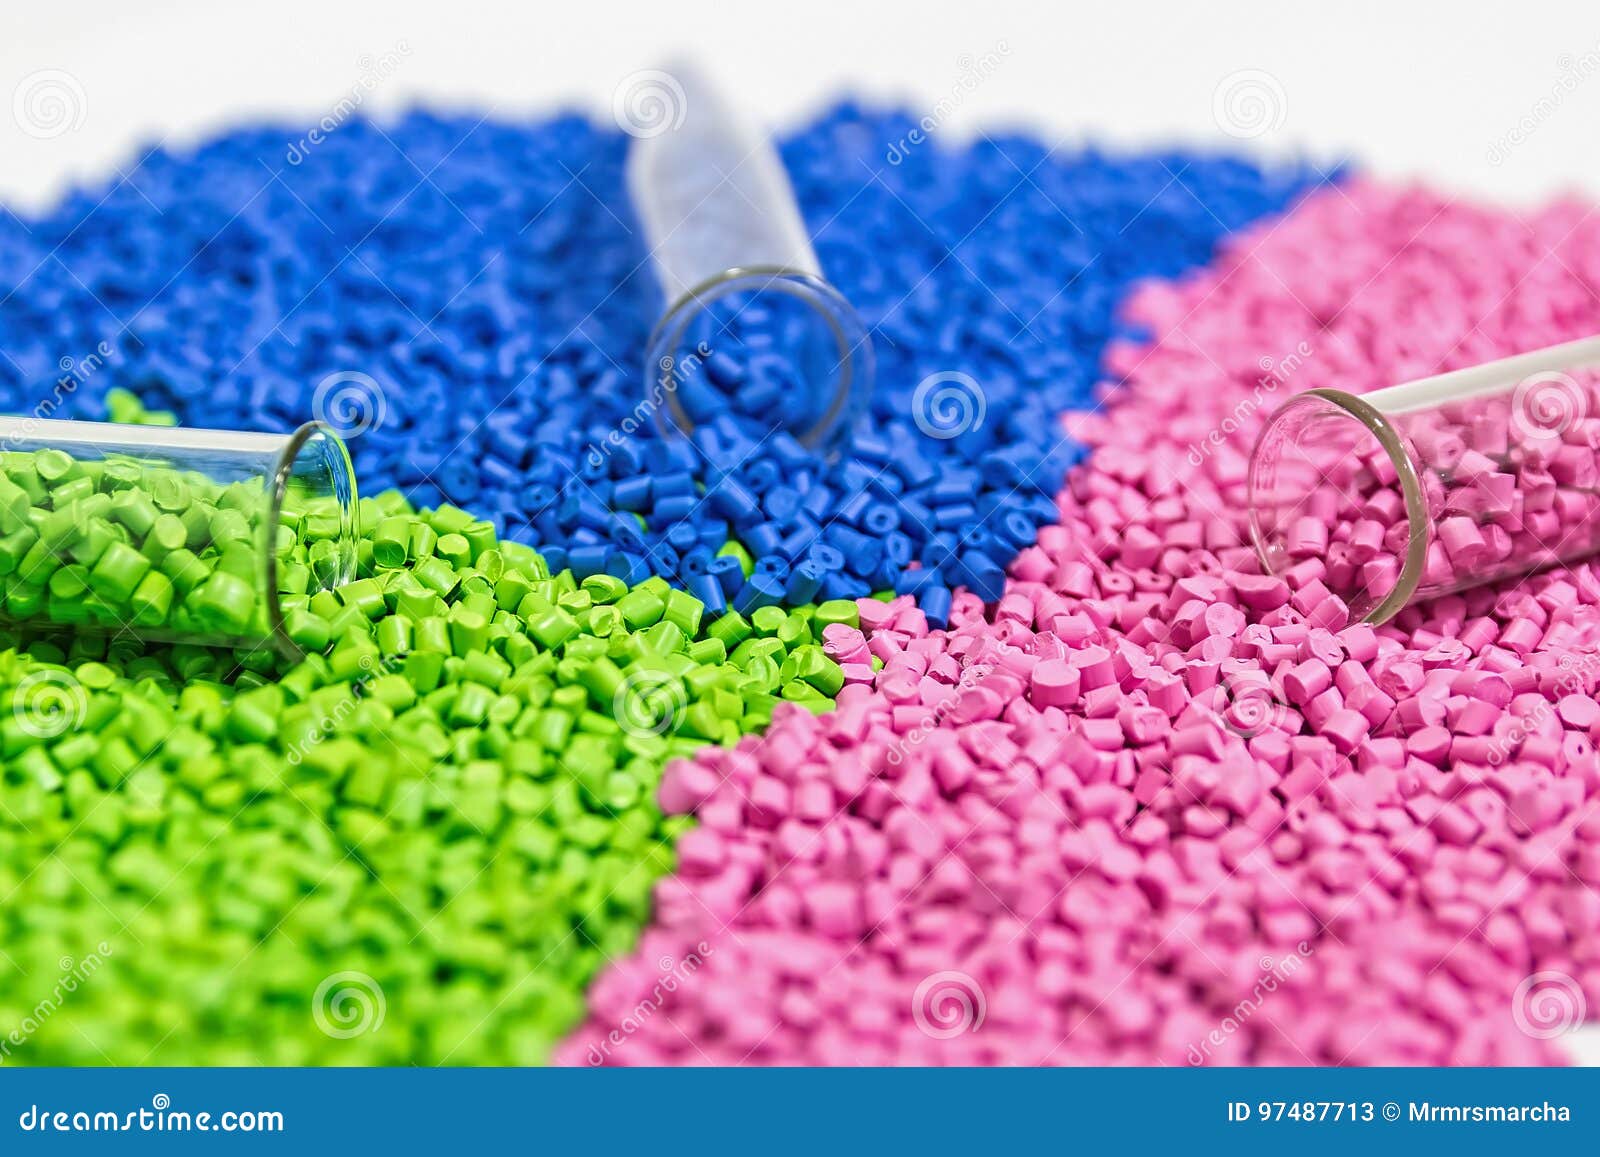 polymeric dye. colorant for plastics. pigment in the granules.